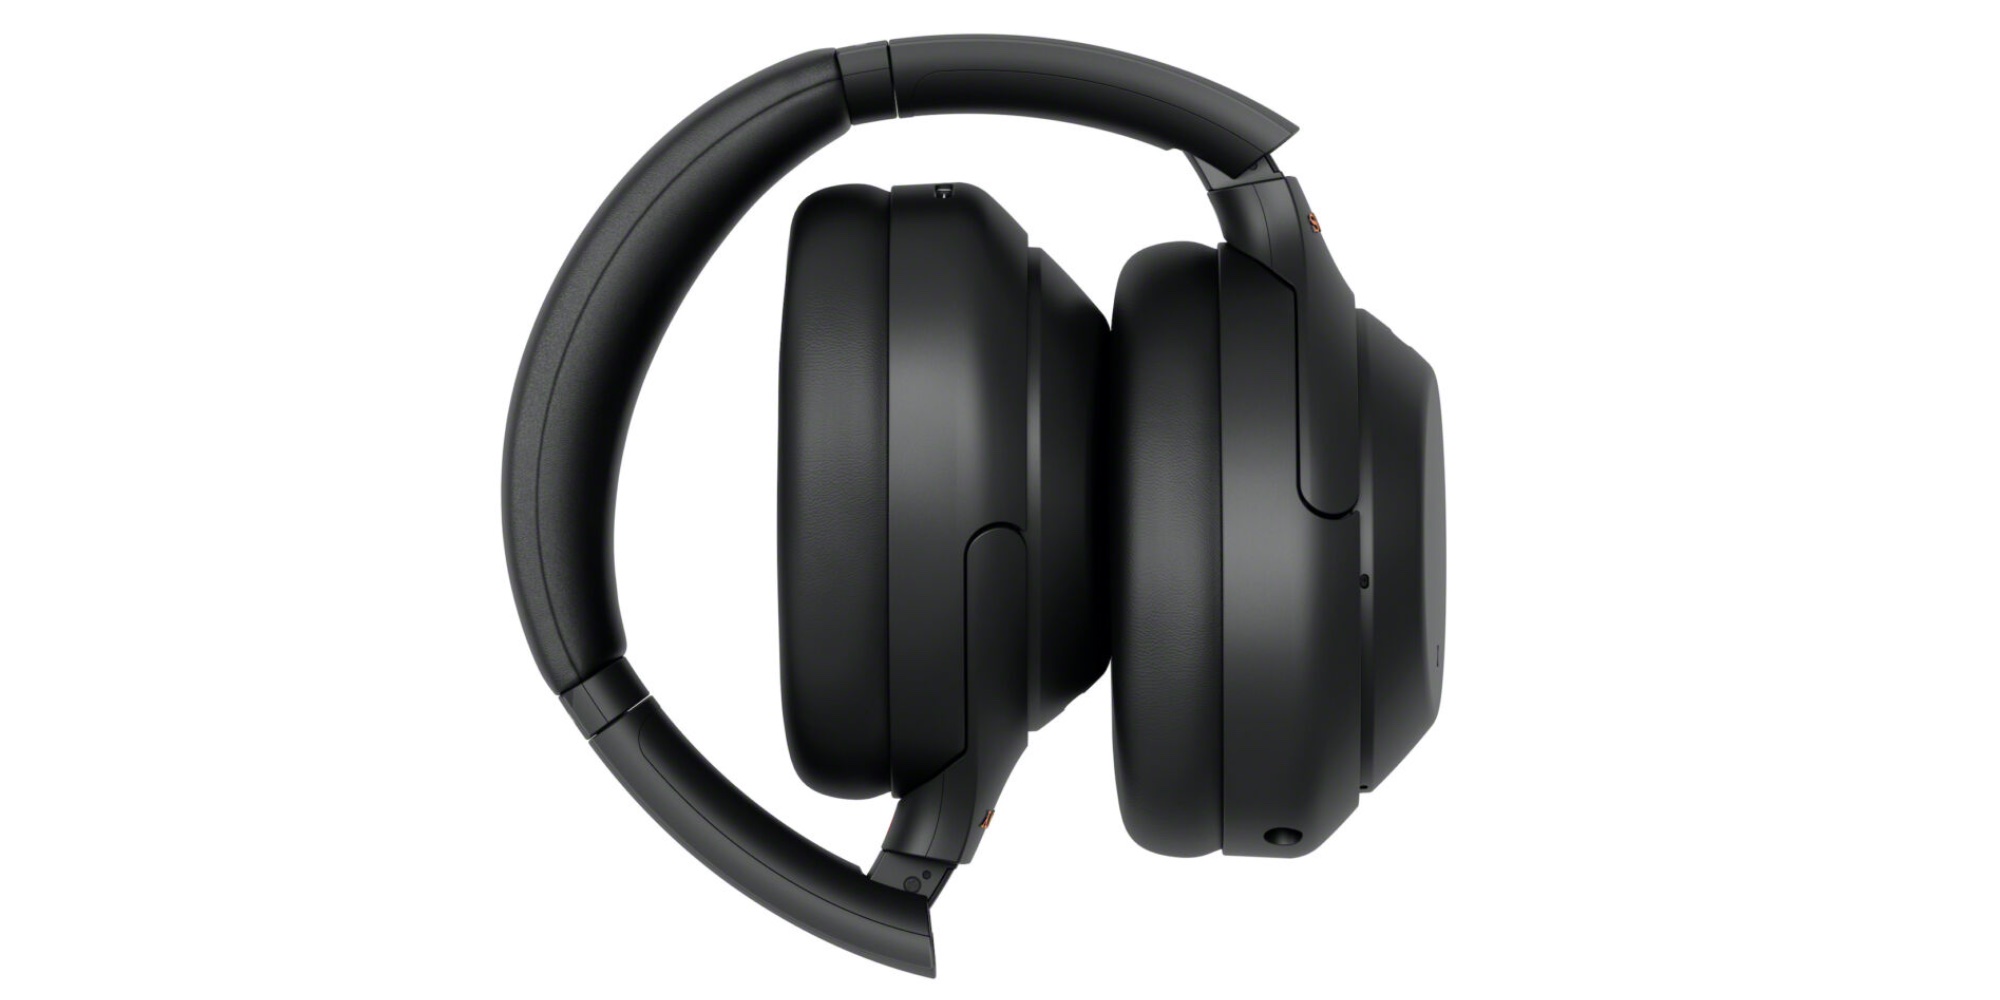 Sony WH-1000XM4 Headphones deliver better ANC and more - 9to5Toys